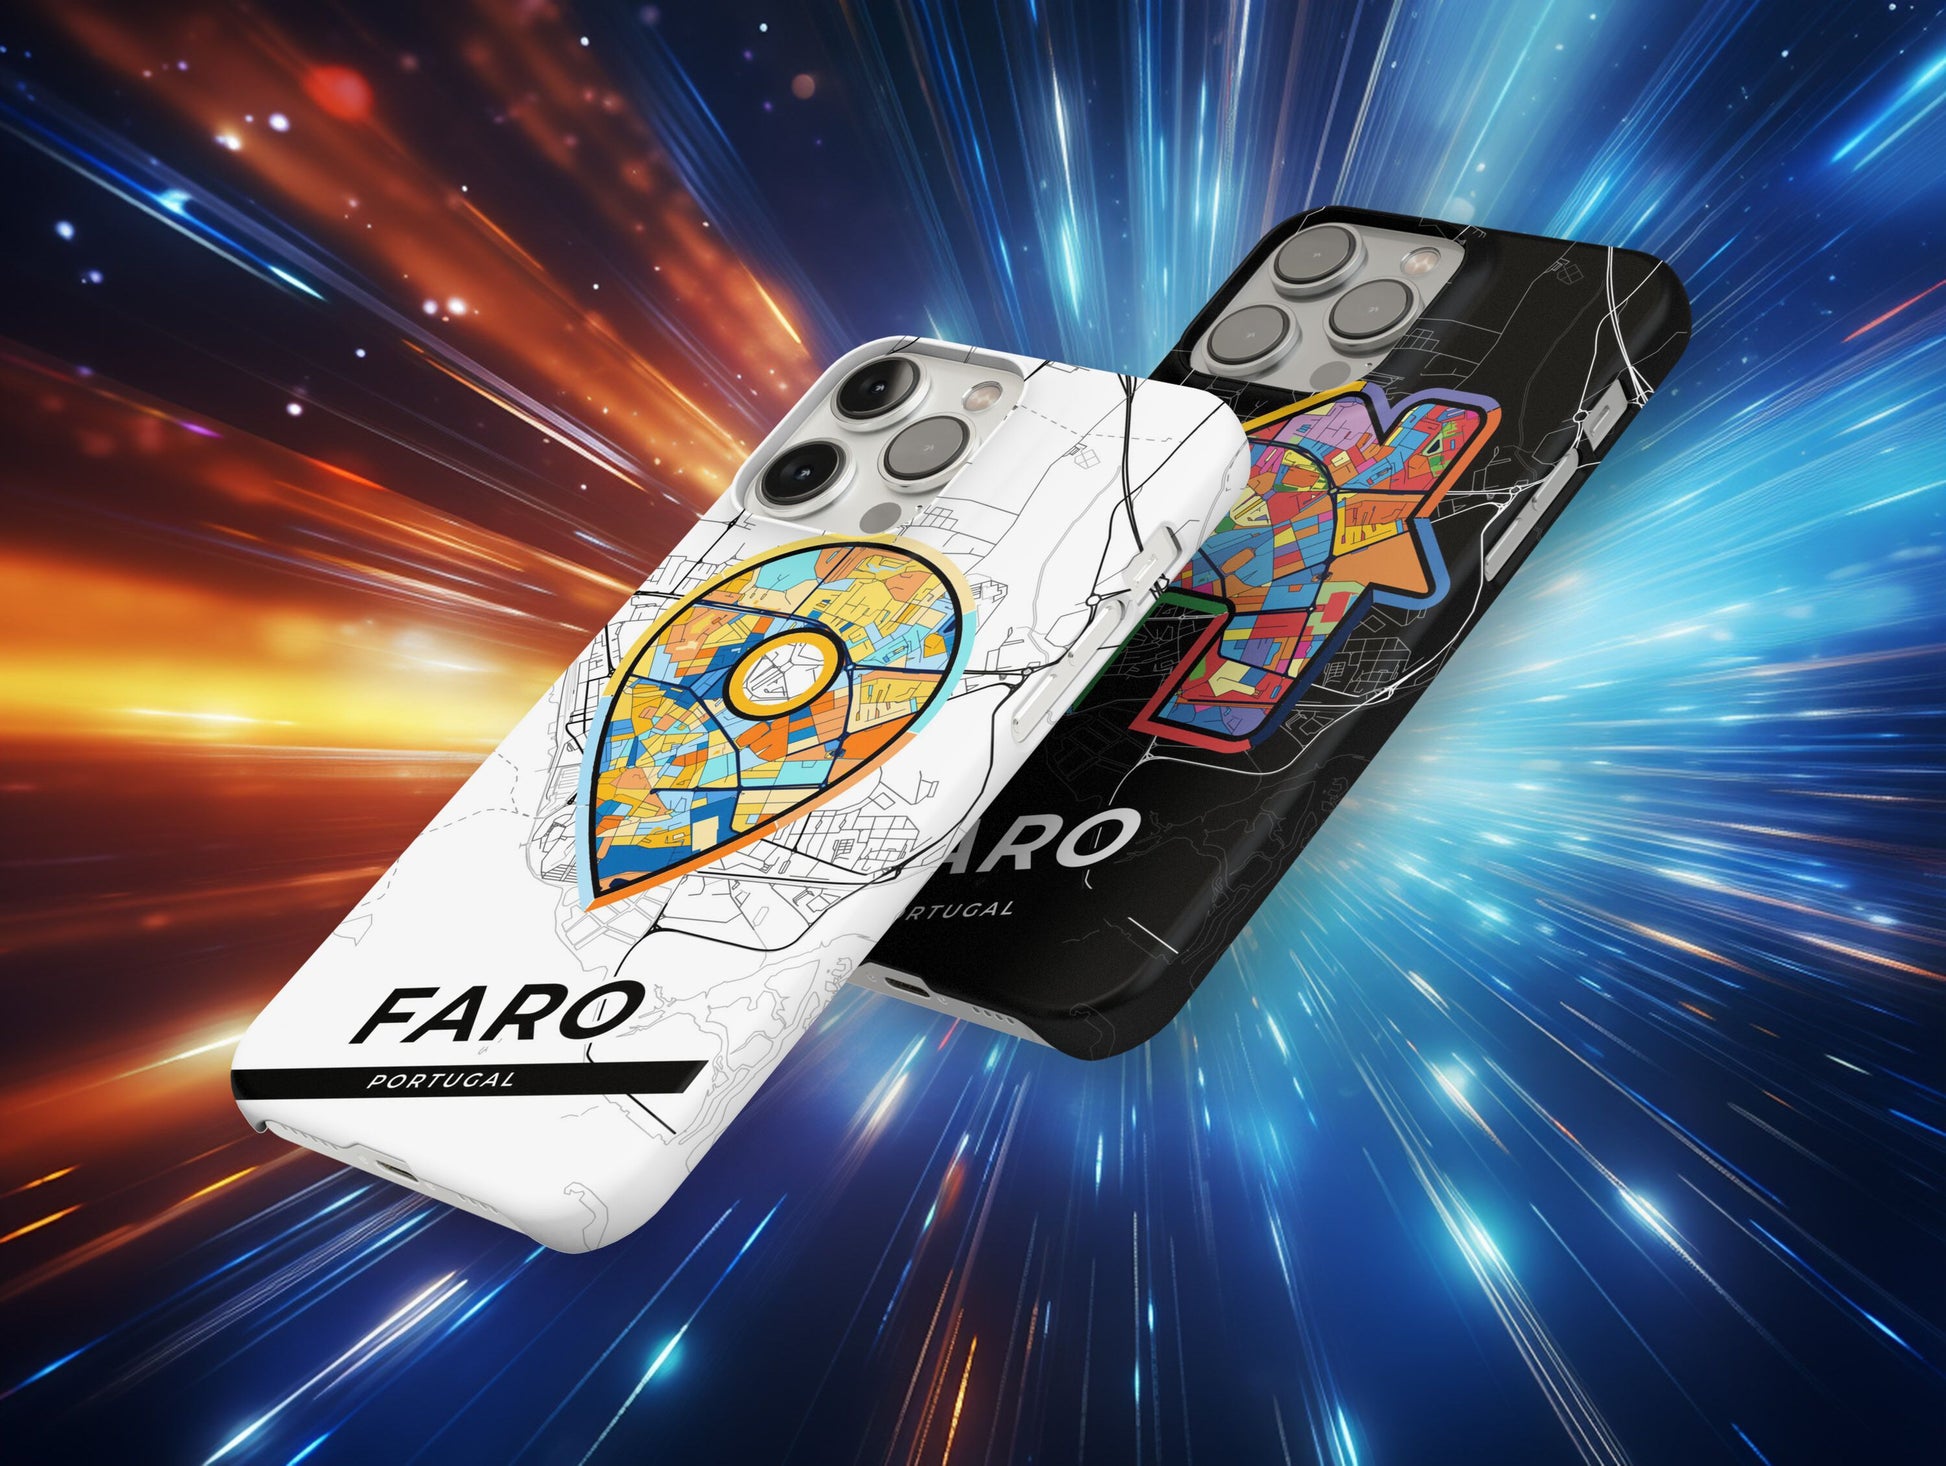 Faro Portugal slim phone case with colorful icon. Birthday, wedding or housewarming gift. Couple match cases.